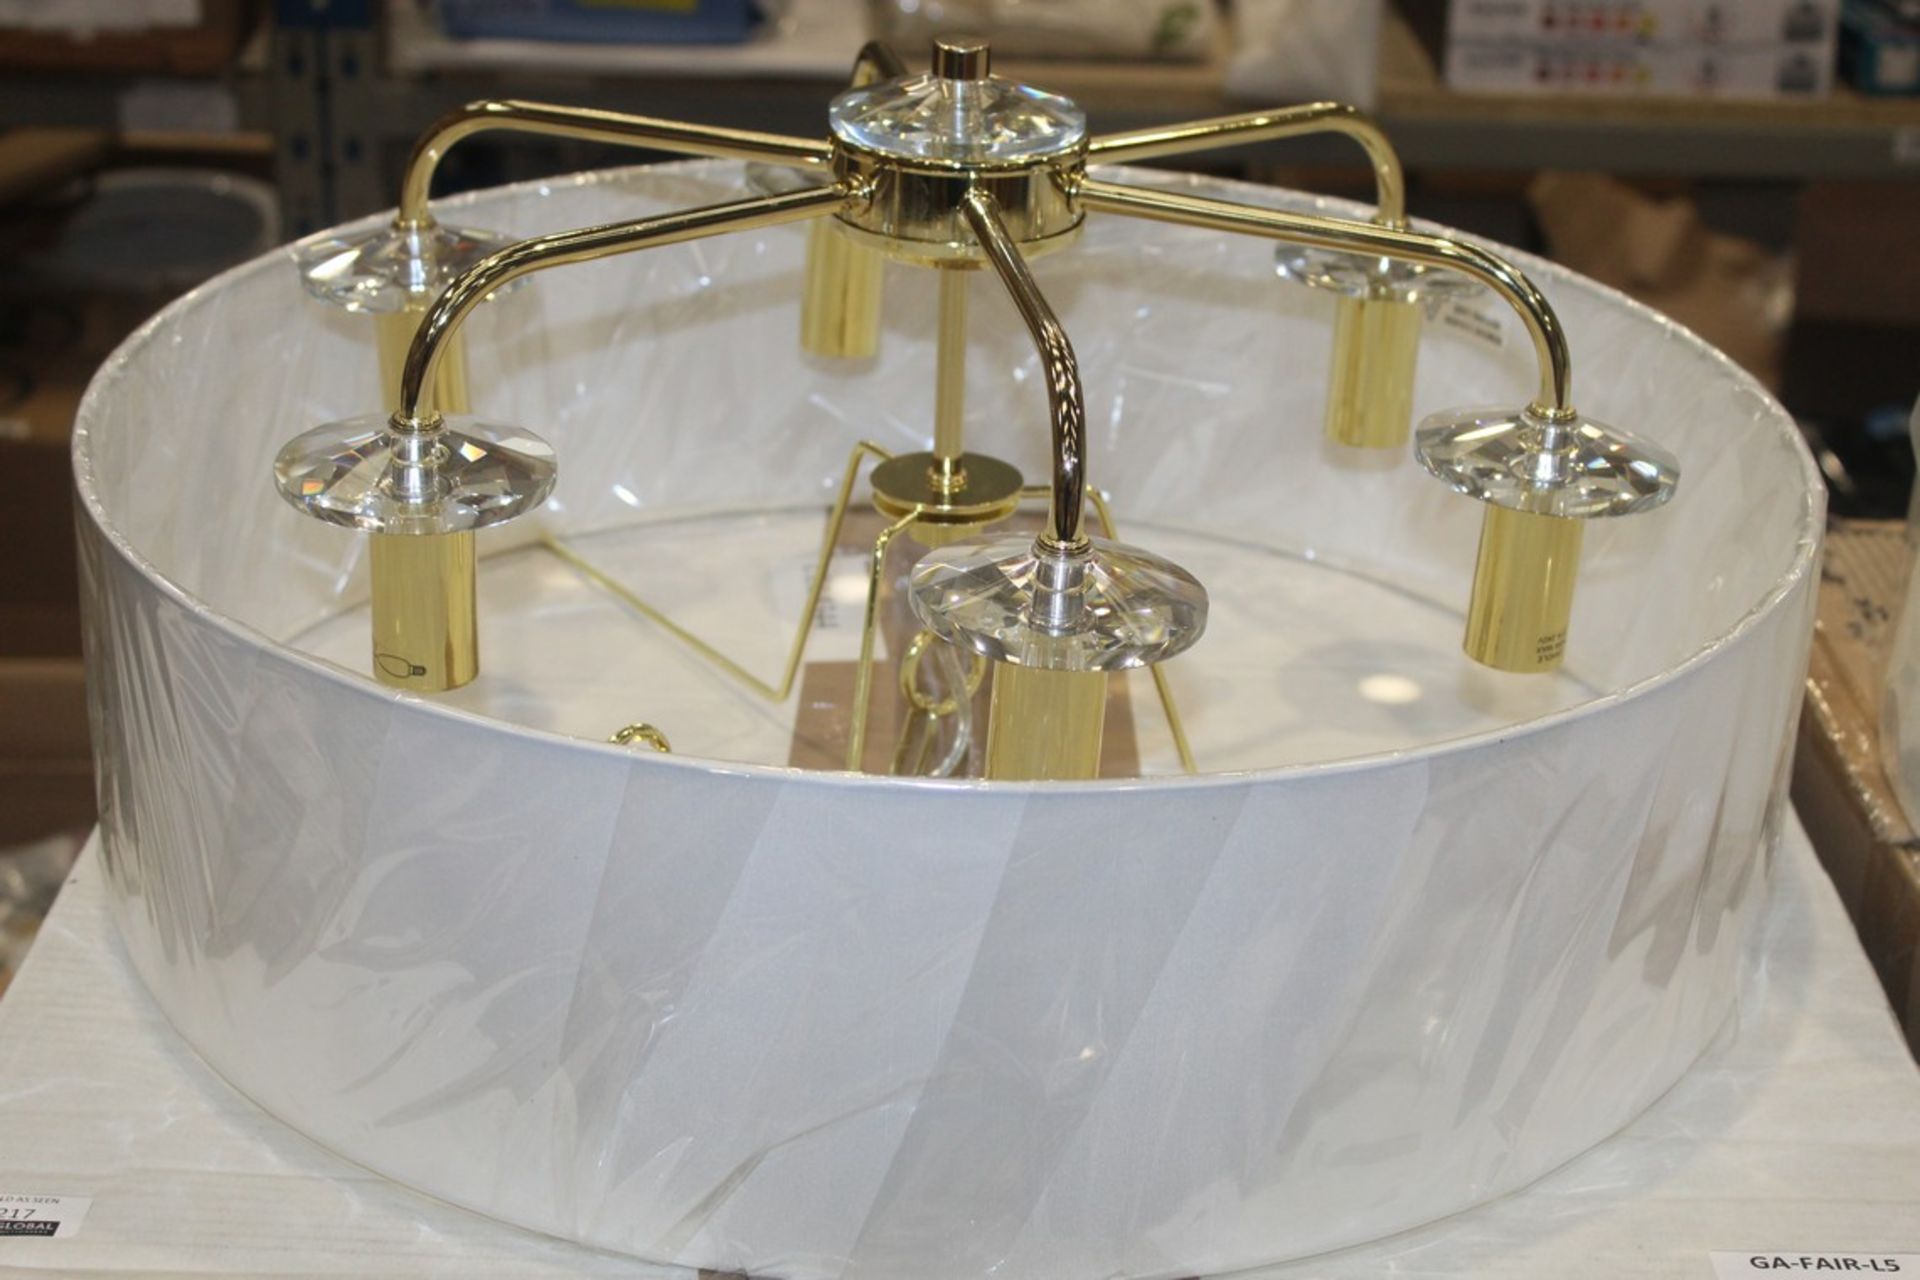 Boxed Enden Lighting Foxworth 6 Light Drum Chandelier In Gold RRP £140 (16228) (Pictures Are For